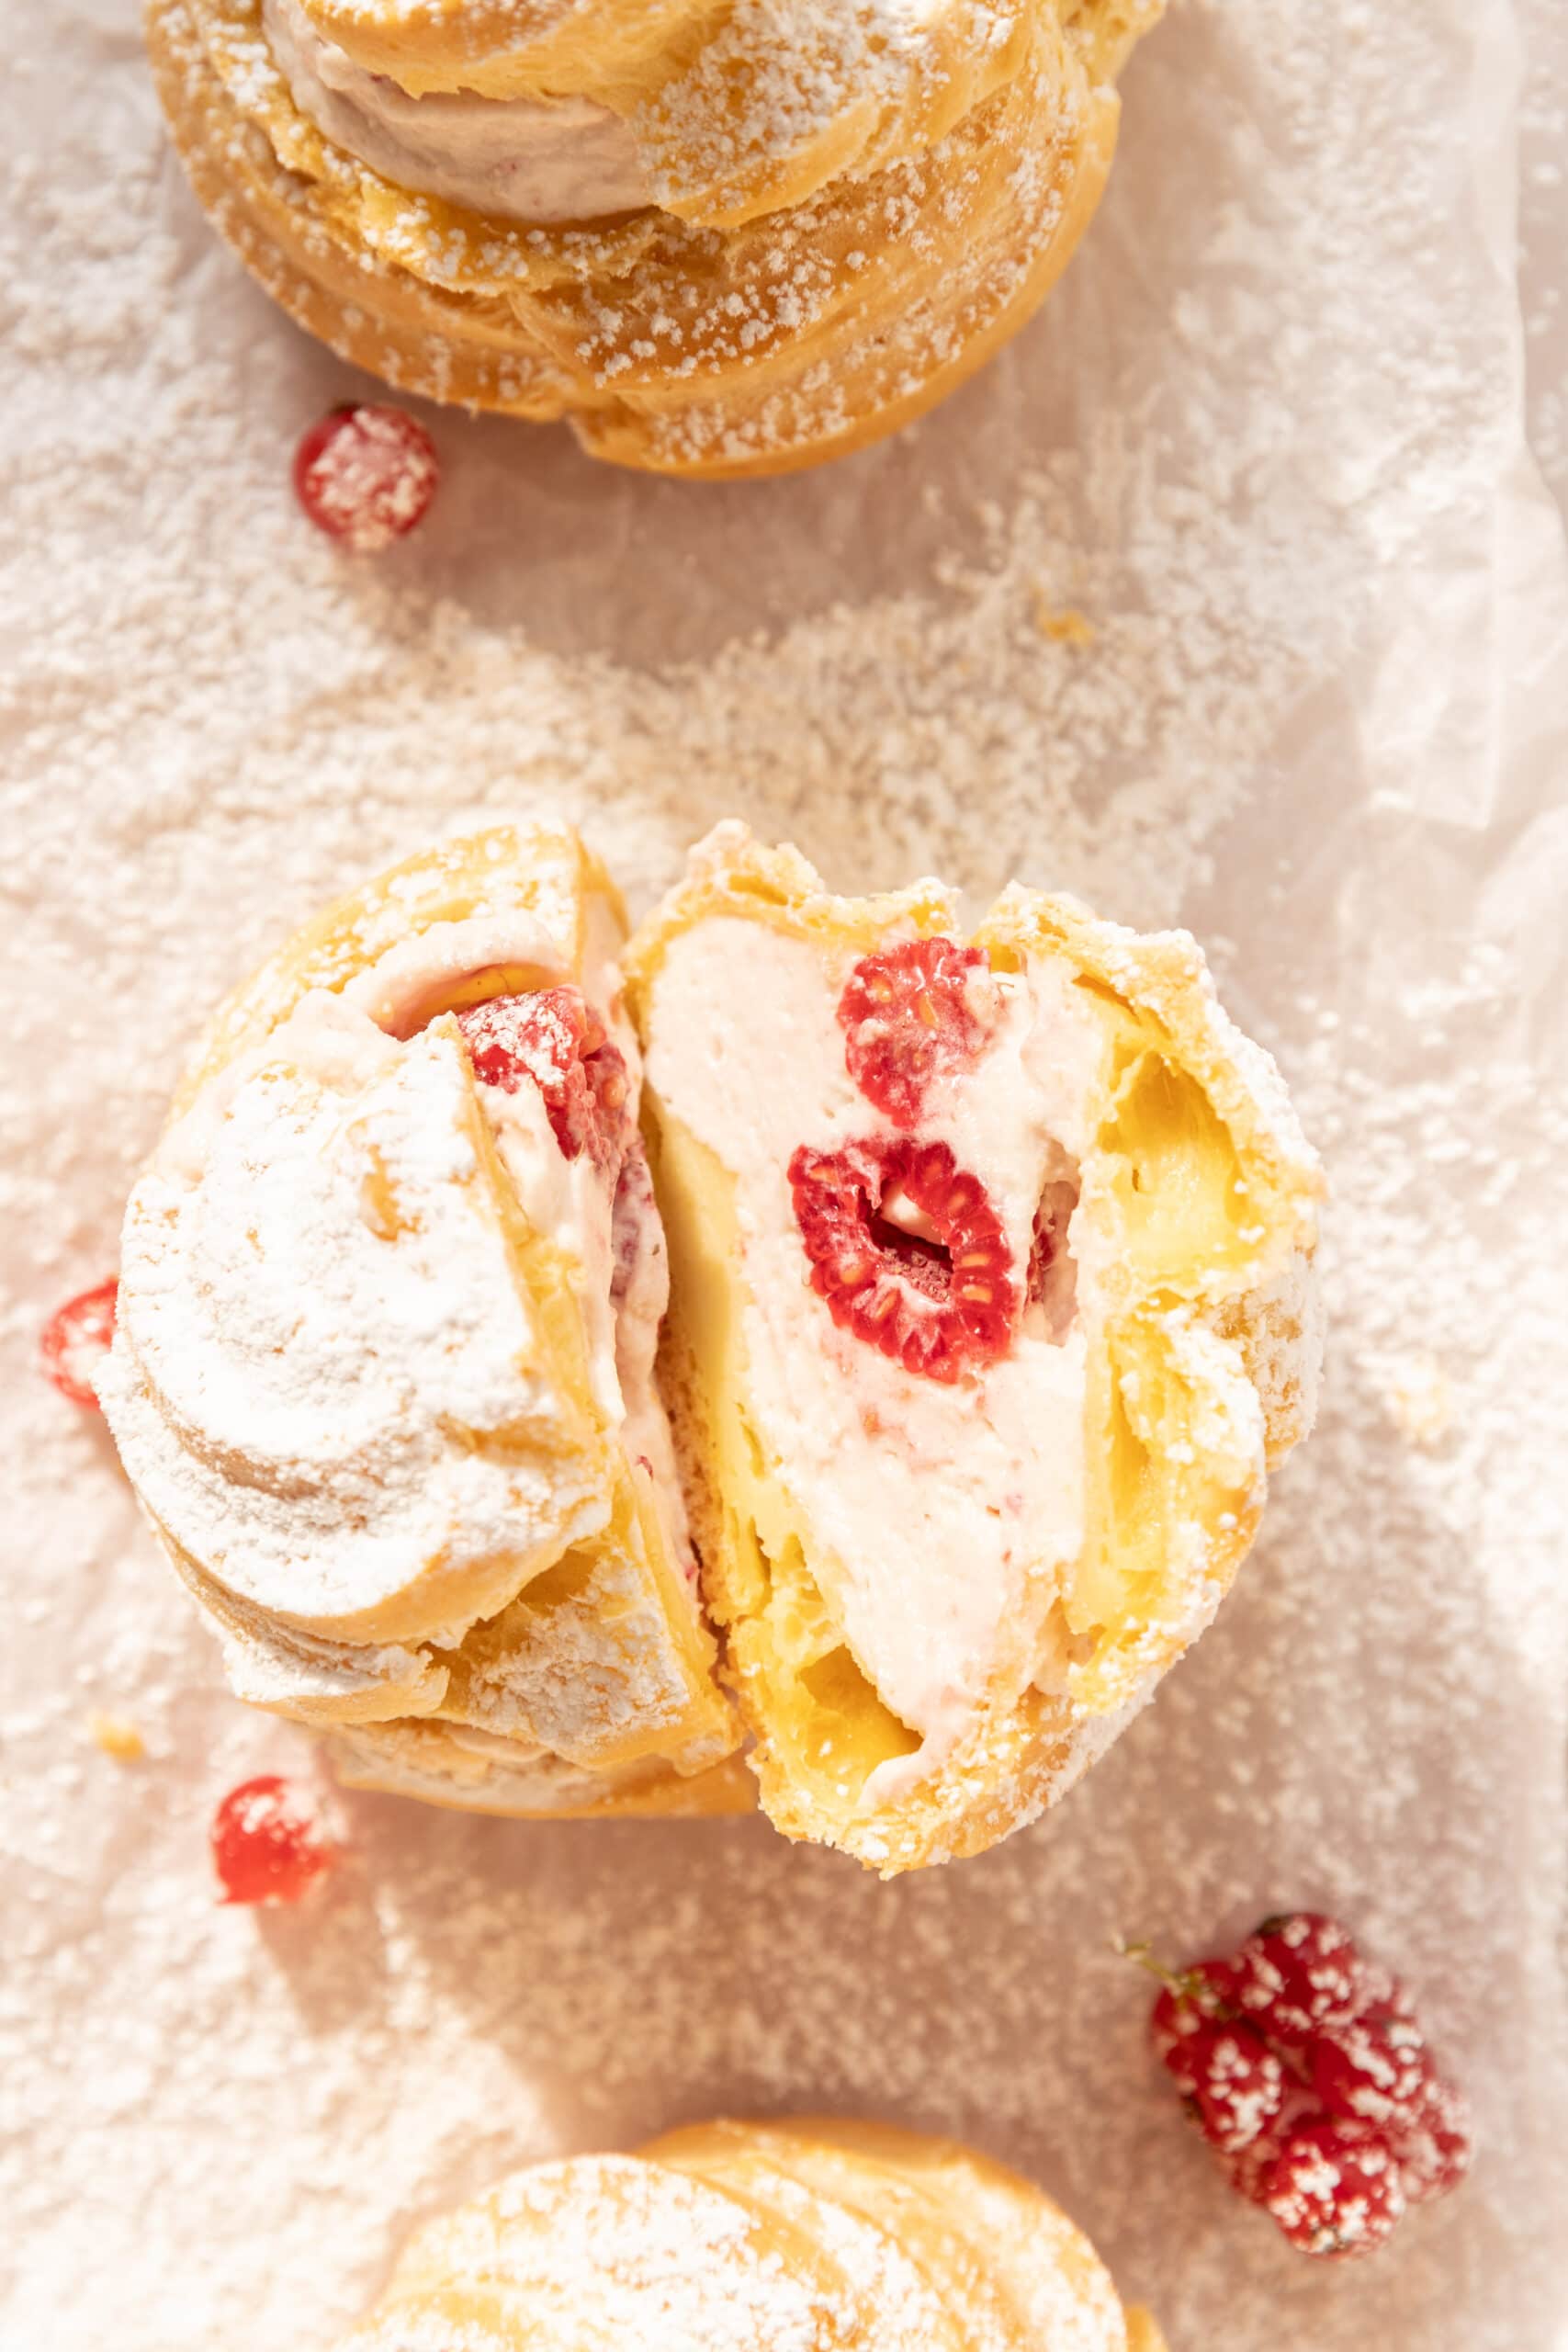 Overhead view of a cream puff filled with raspberry whipped cream, cut in half so the filling is showing.